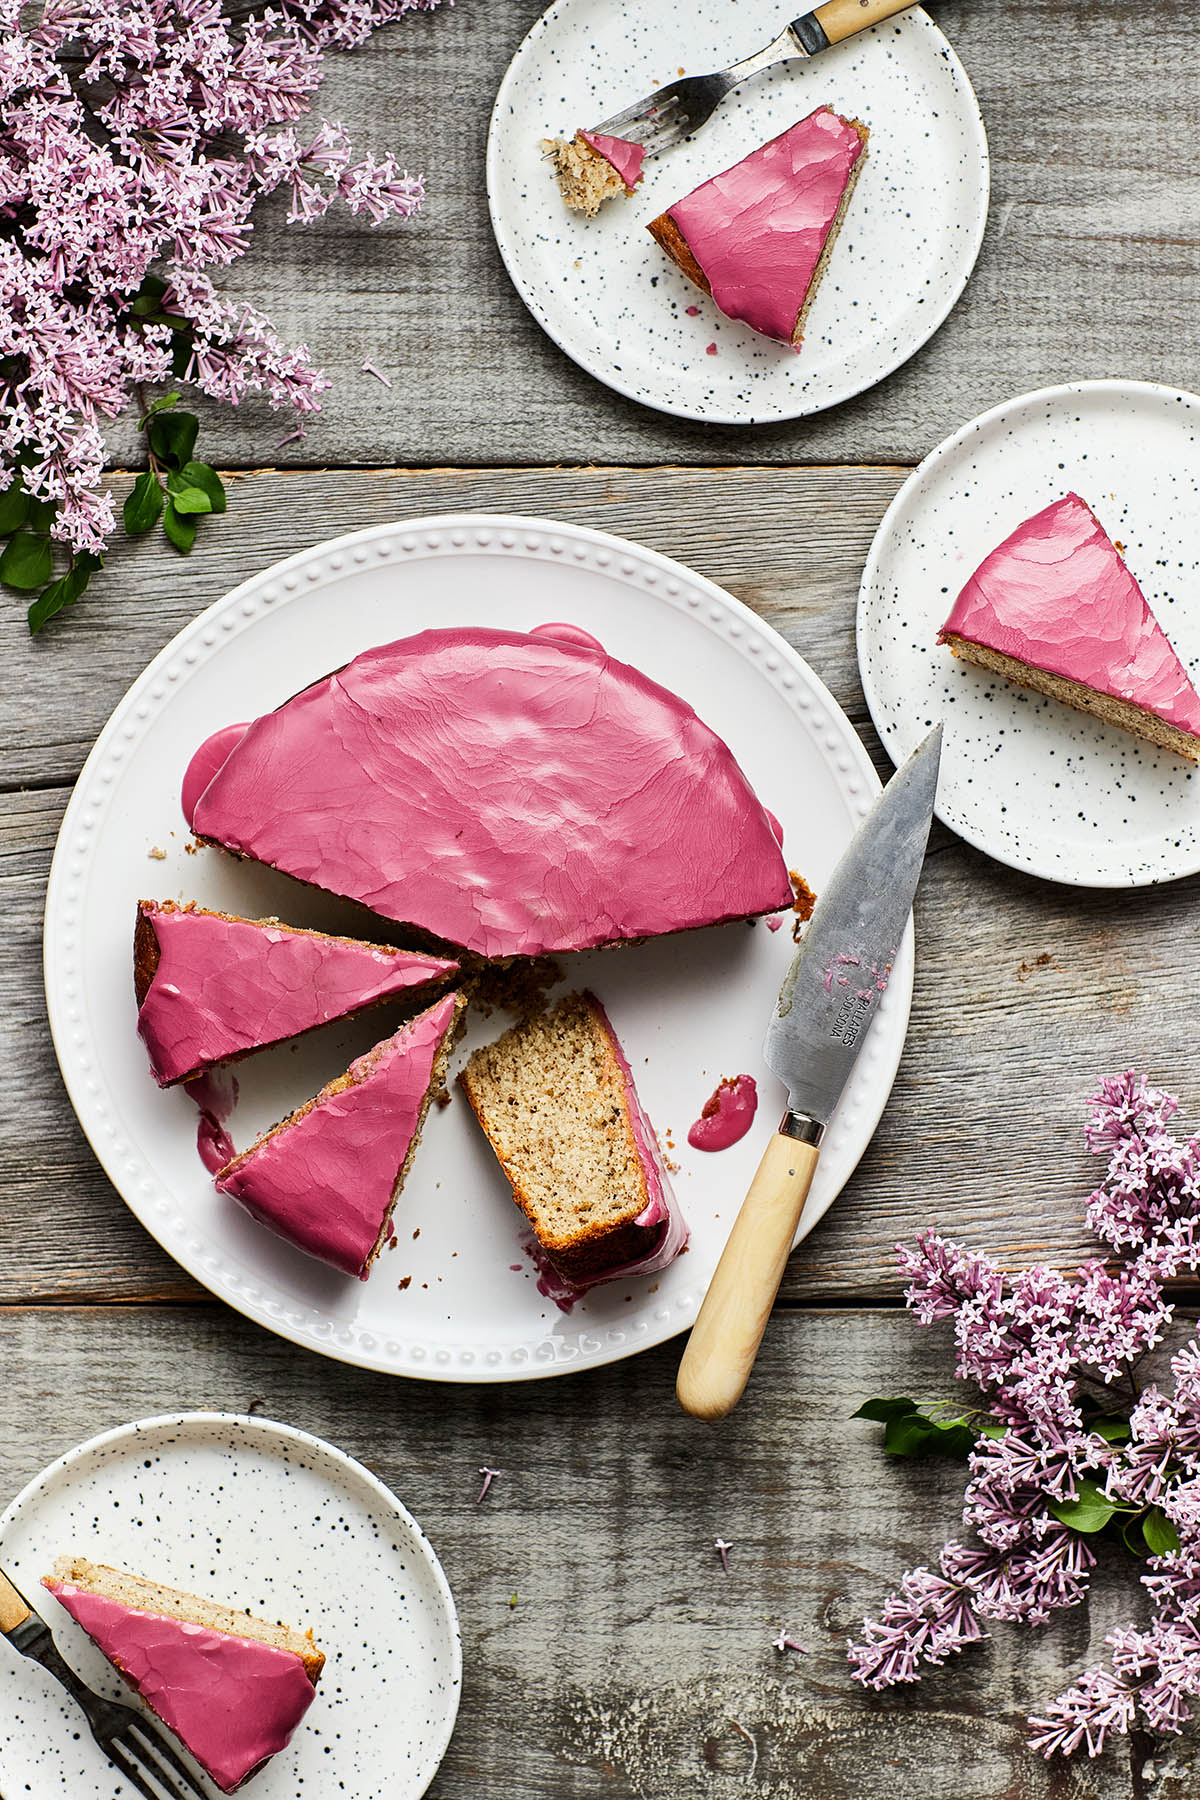 Overhead image of a sliced Earl Grey yogurt cake on a grey weathered table with slices of cake on small plates and fresh lilacs on the table around the cake.